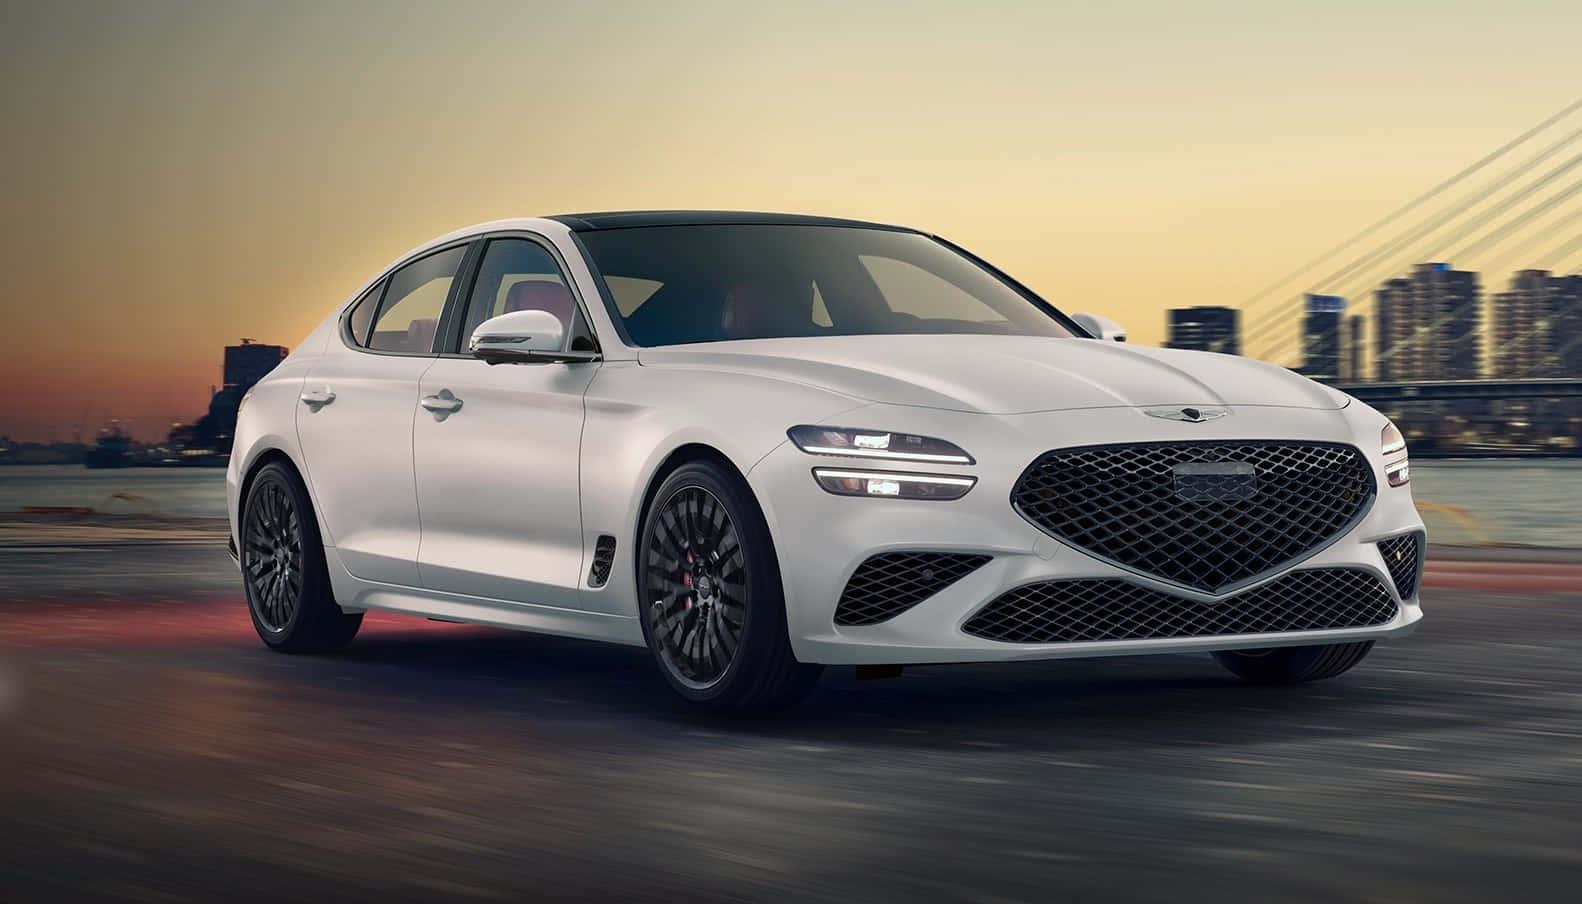 The 2020 Gts Sedan Is Driving Down The Road